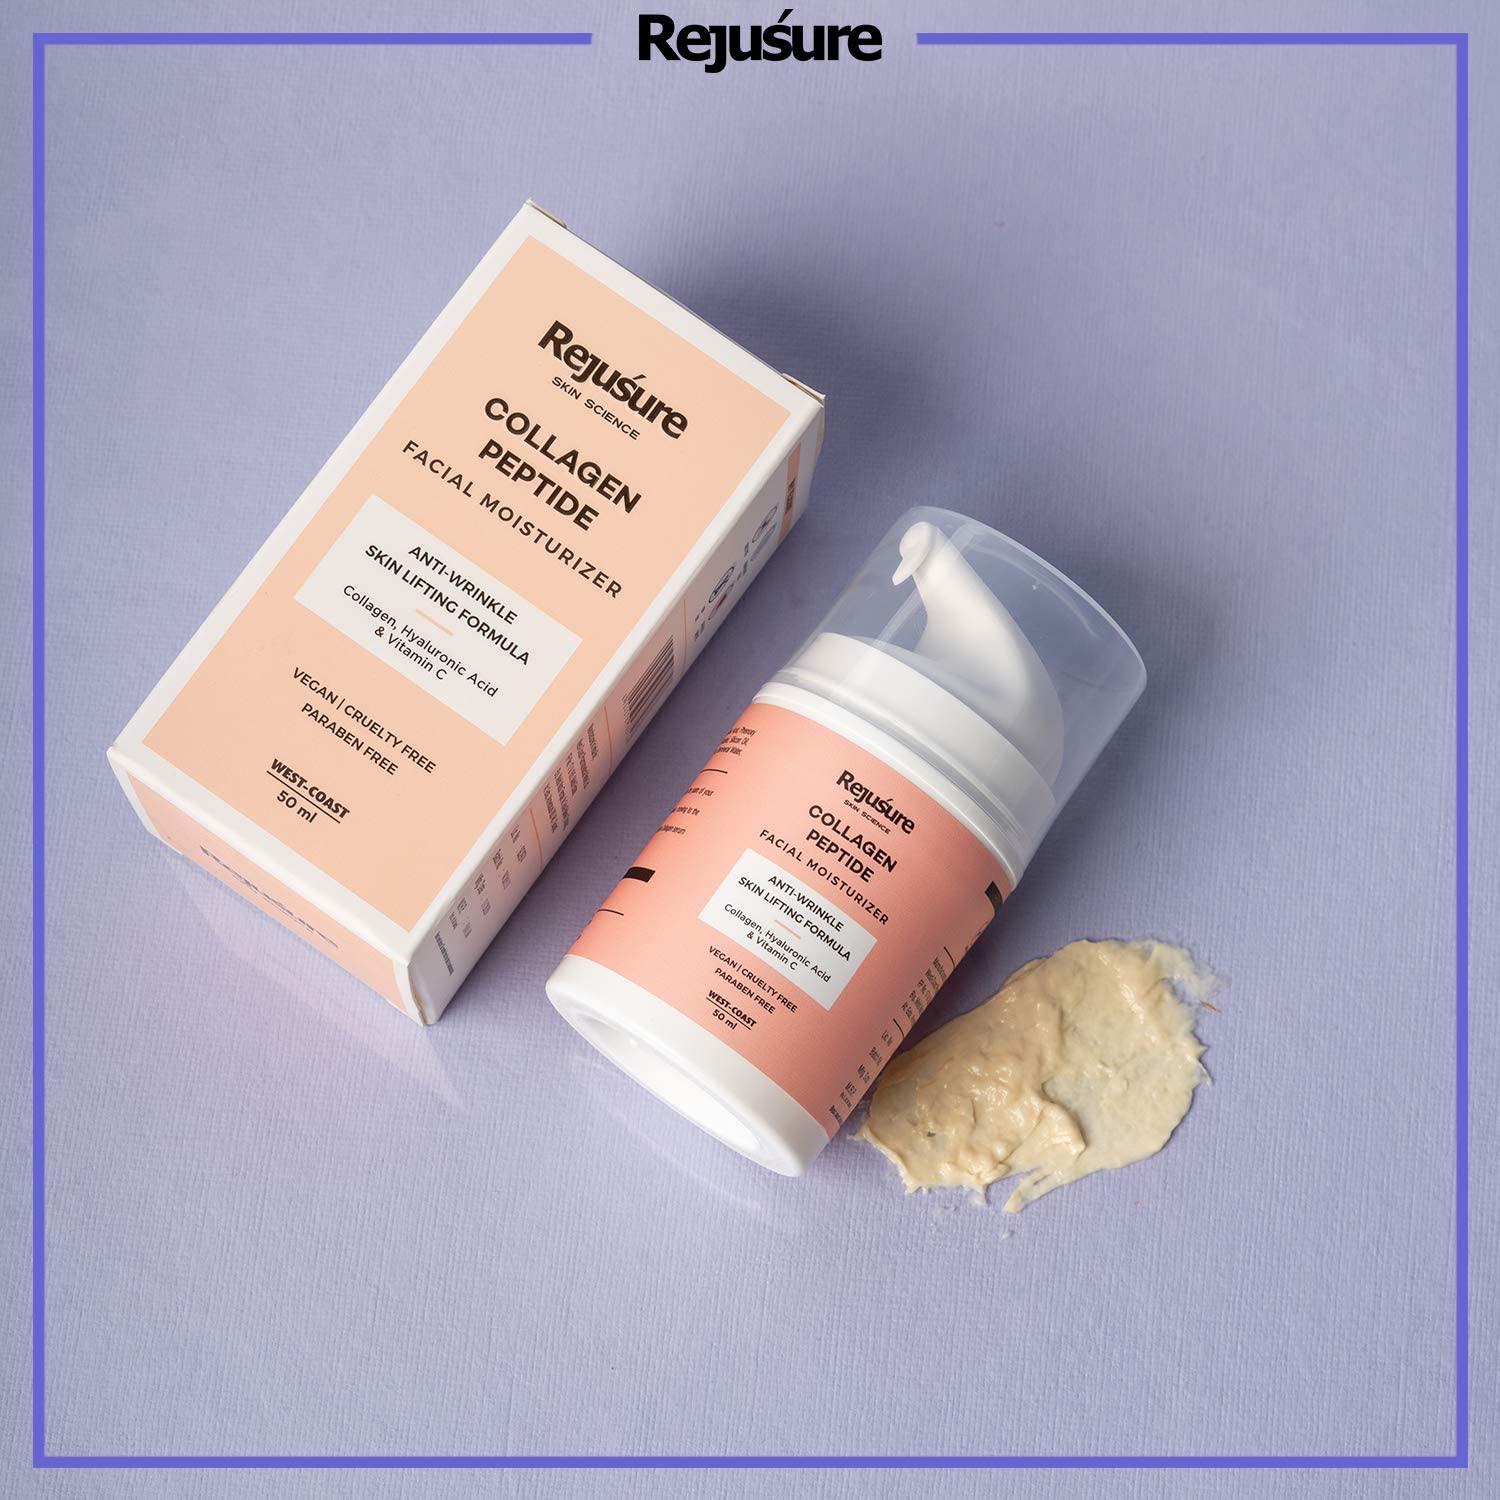 Rejusure Collagen Peptide Cream Moisturizer Day Night Anti Aging/Anti, Wrinkle Overnight Repair & firming Cream for Face - 50ml